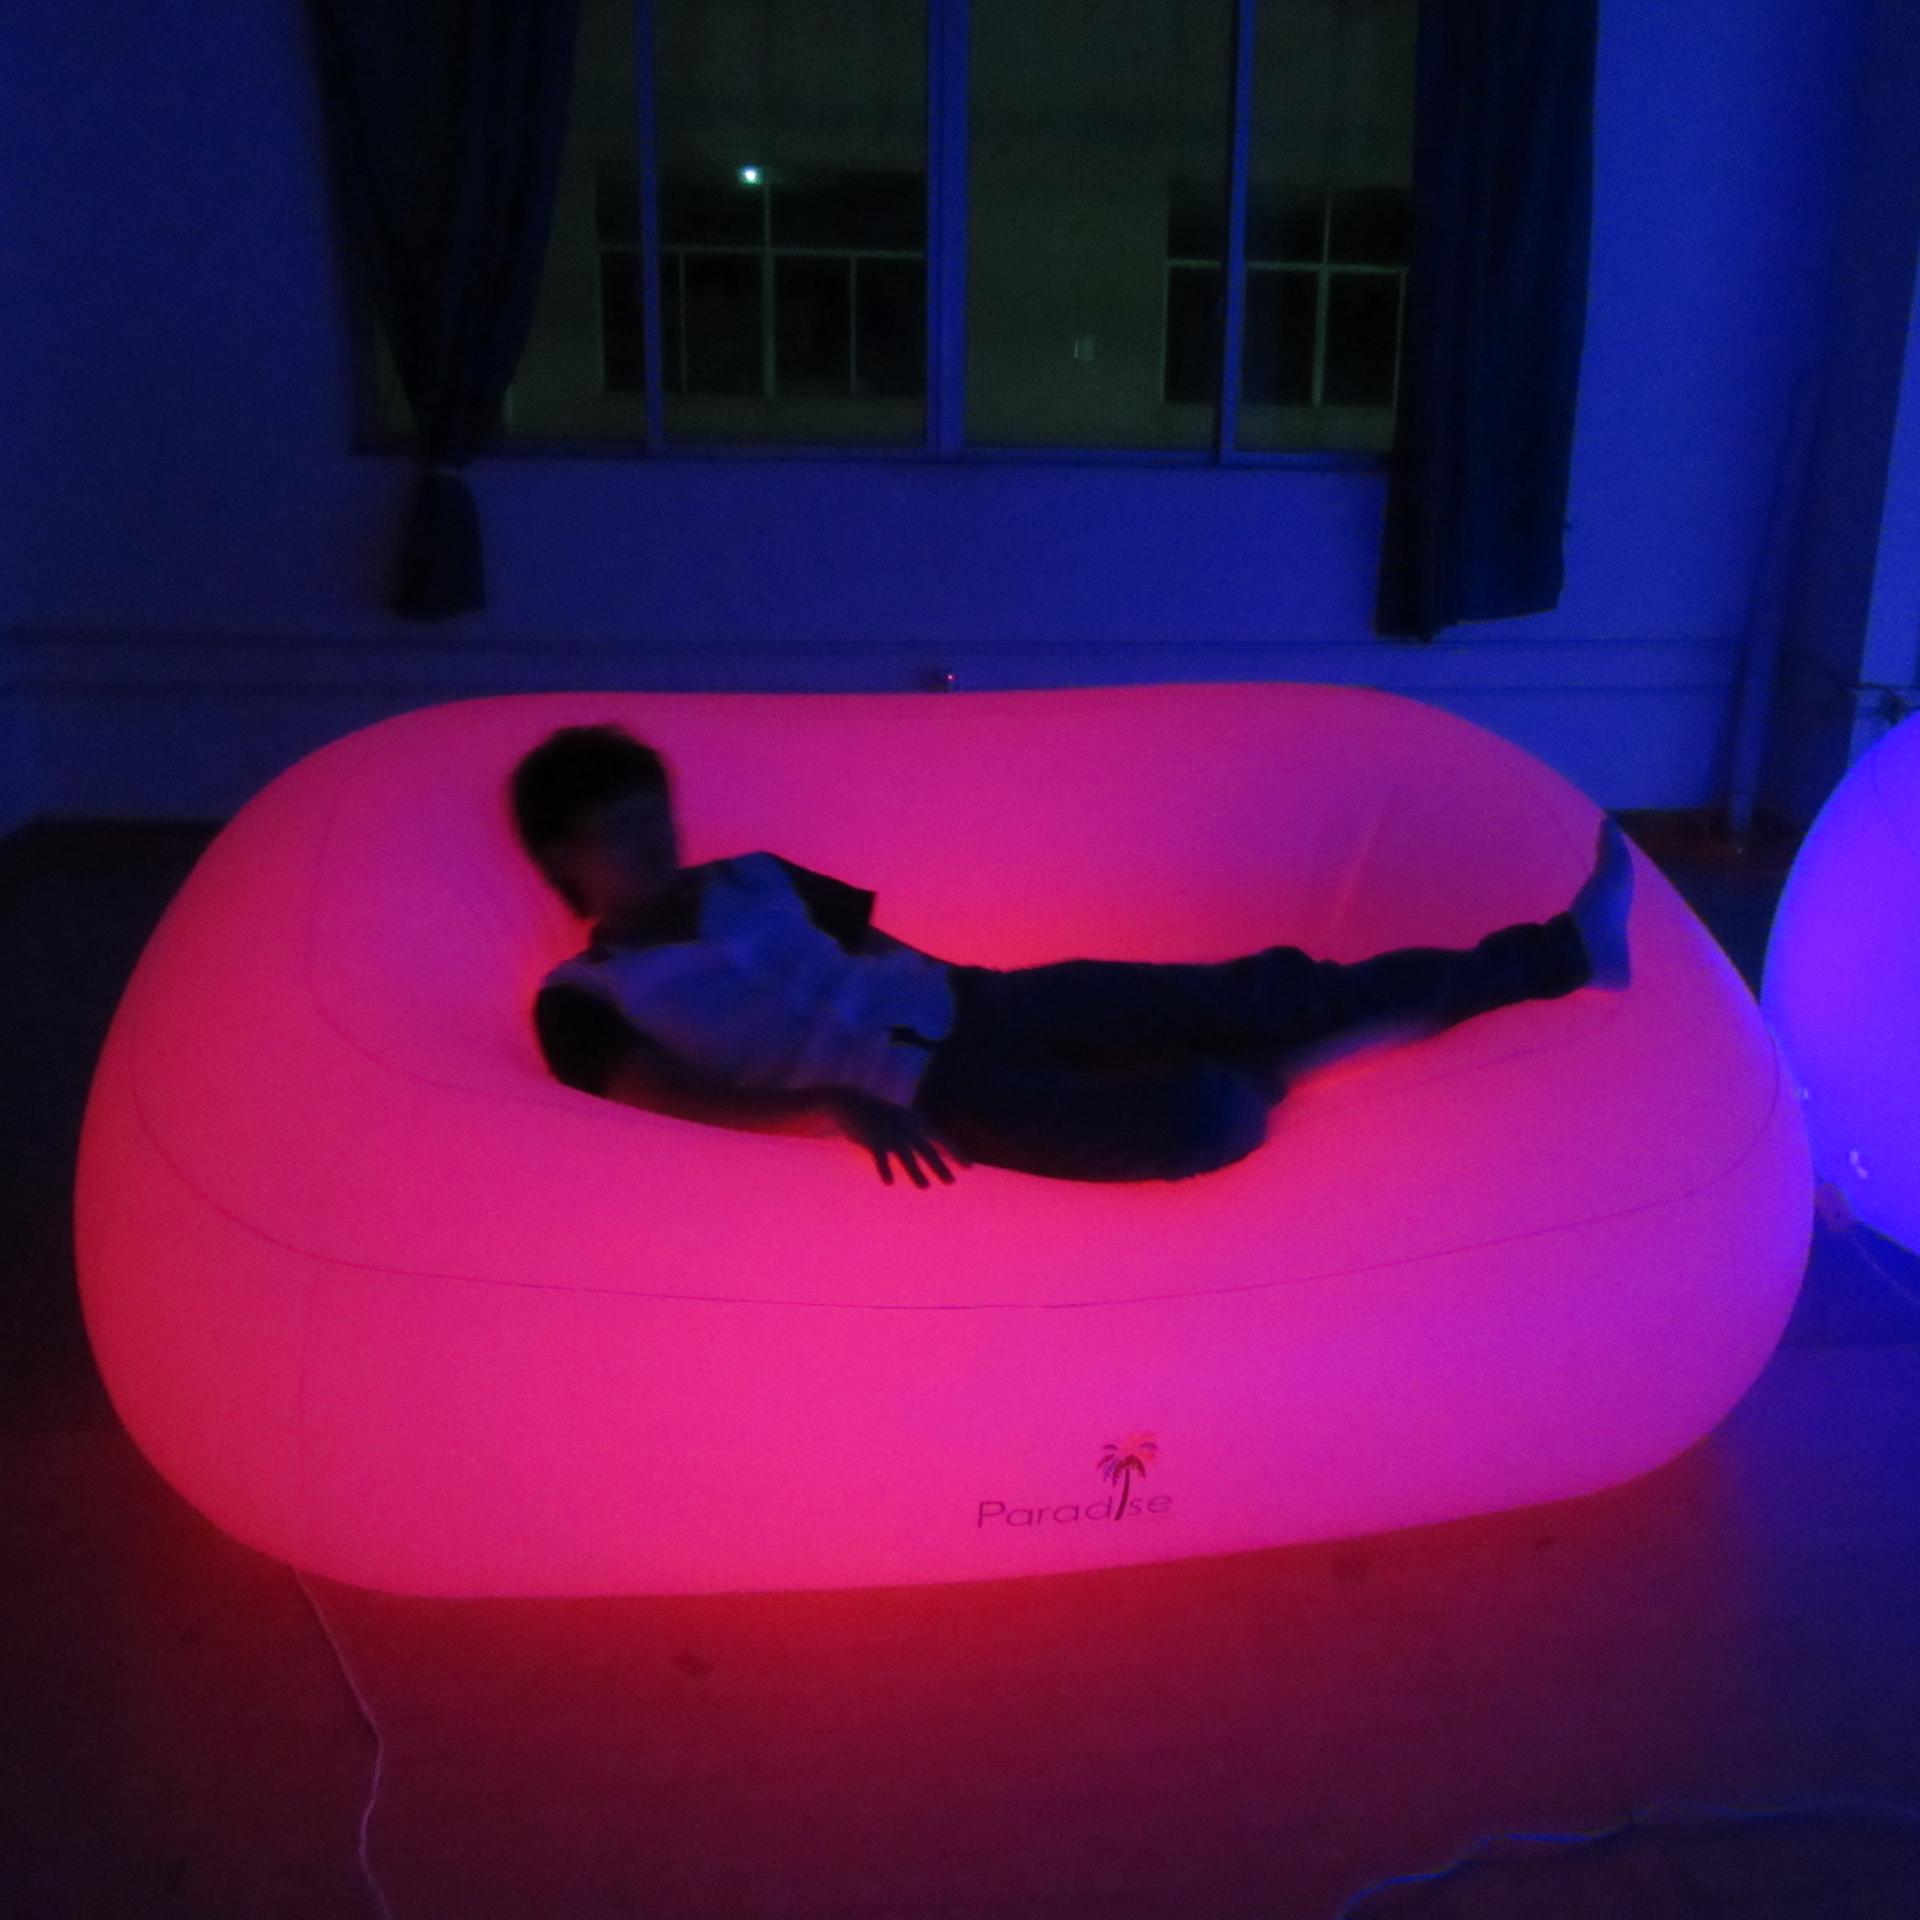 Customised 3 Seats Inflatable Led Lighting Transparent PVC Long Sofa Perfect For Event Decorations